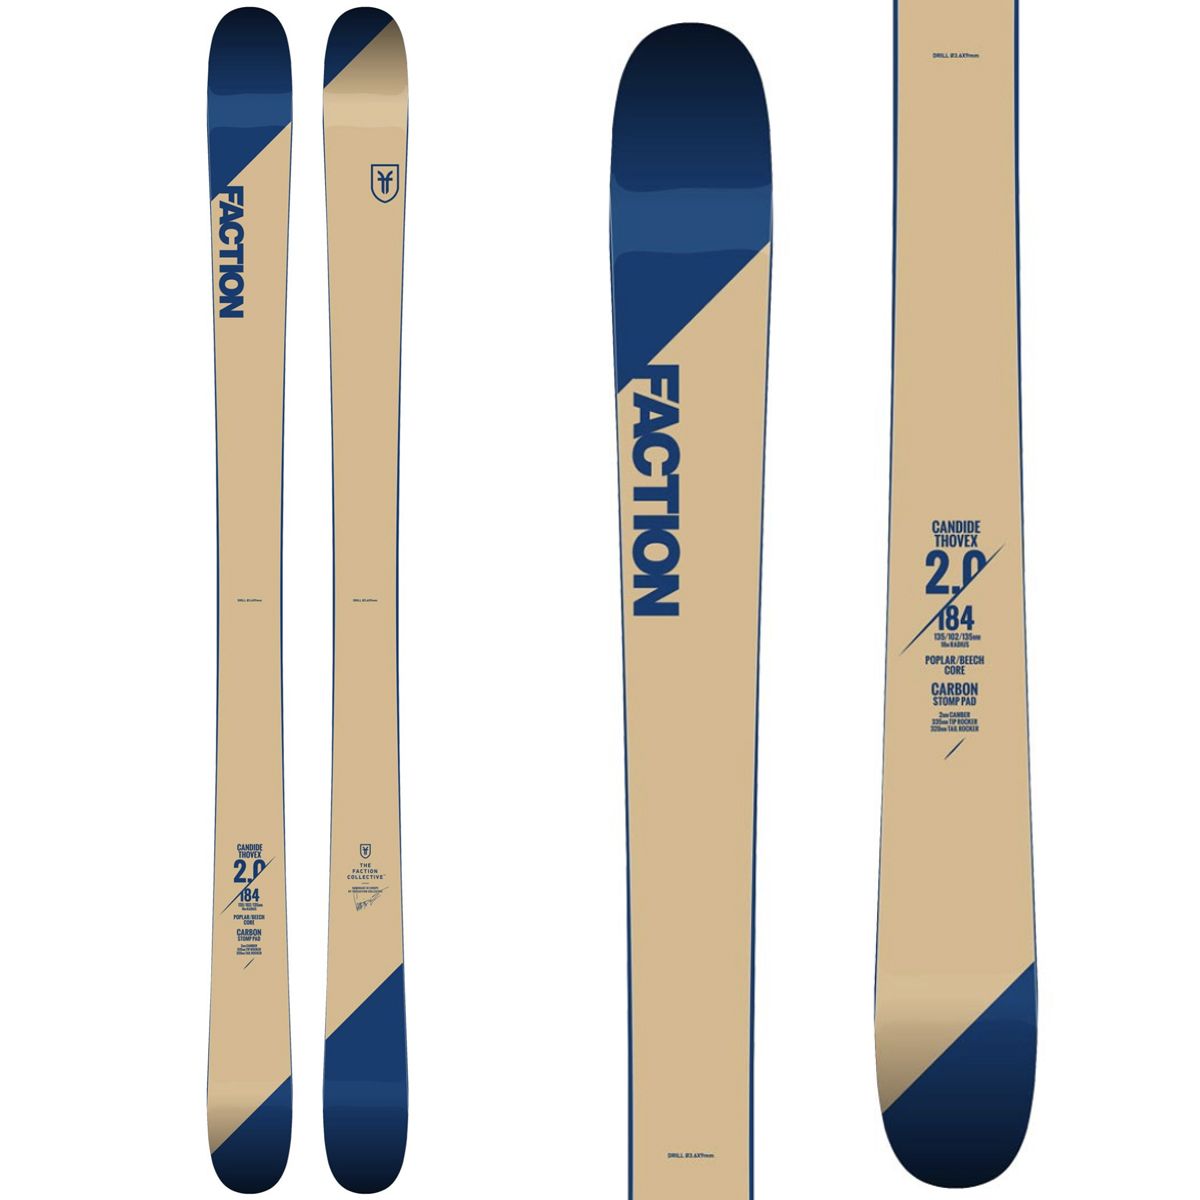 Skis Faction Candide 2.0 2019